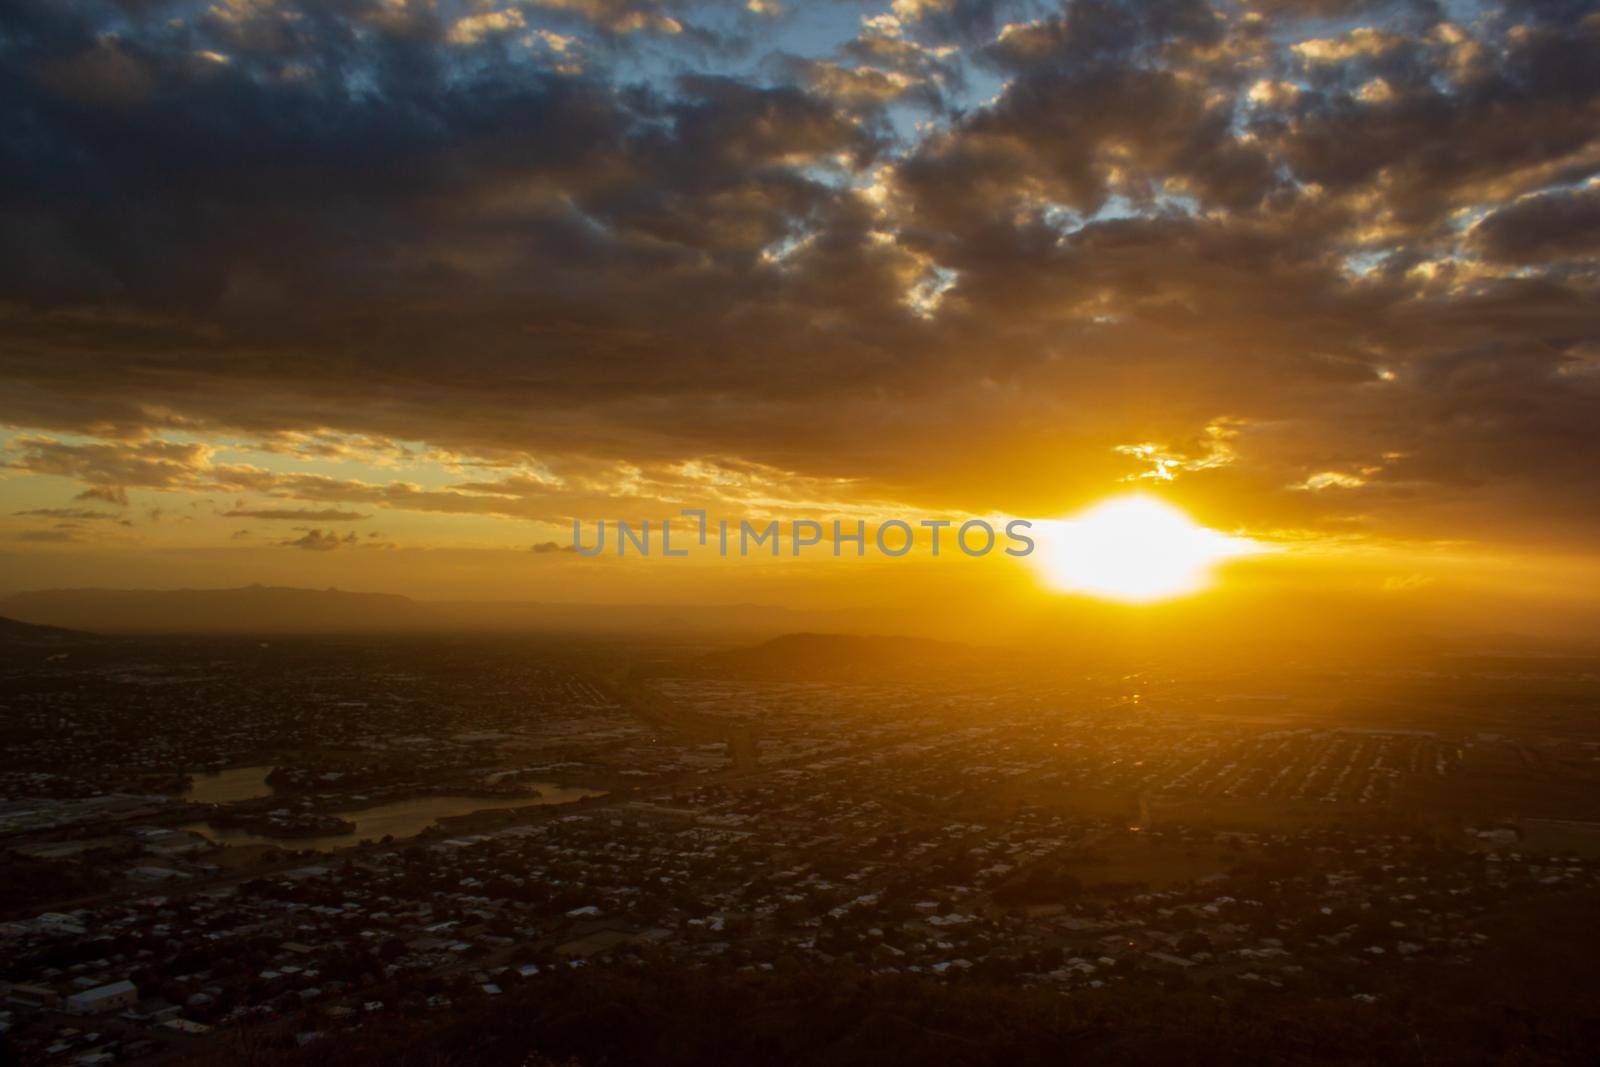 Sunset view of Townsville, Queensland, Australia looking from Castle Hill towards the coast and calm sea by bettercallcurry